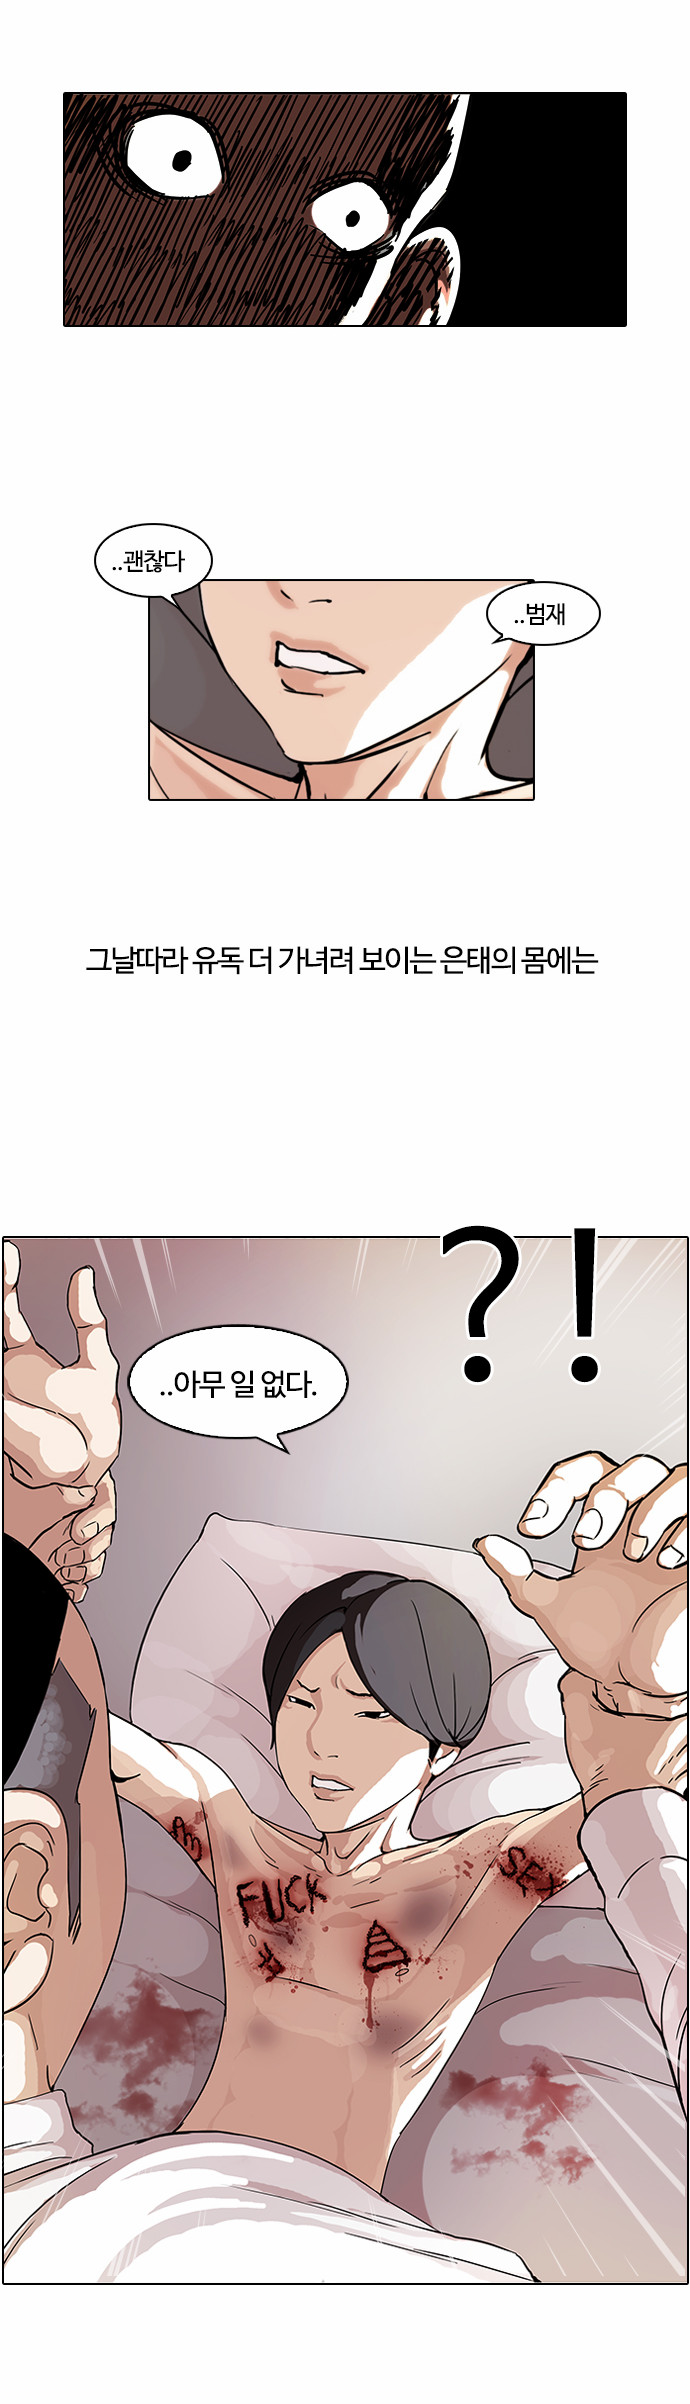 Lookism - Chapter 53 - Page 22